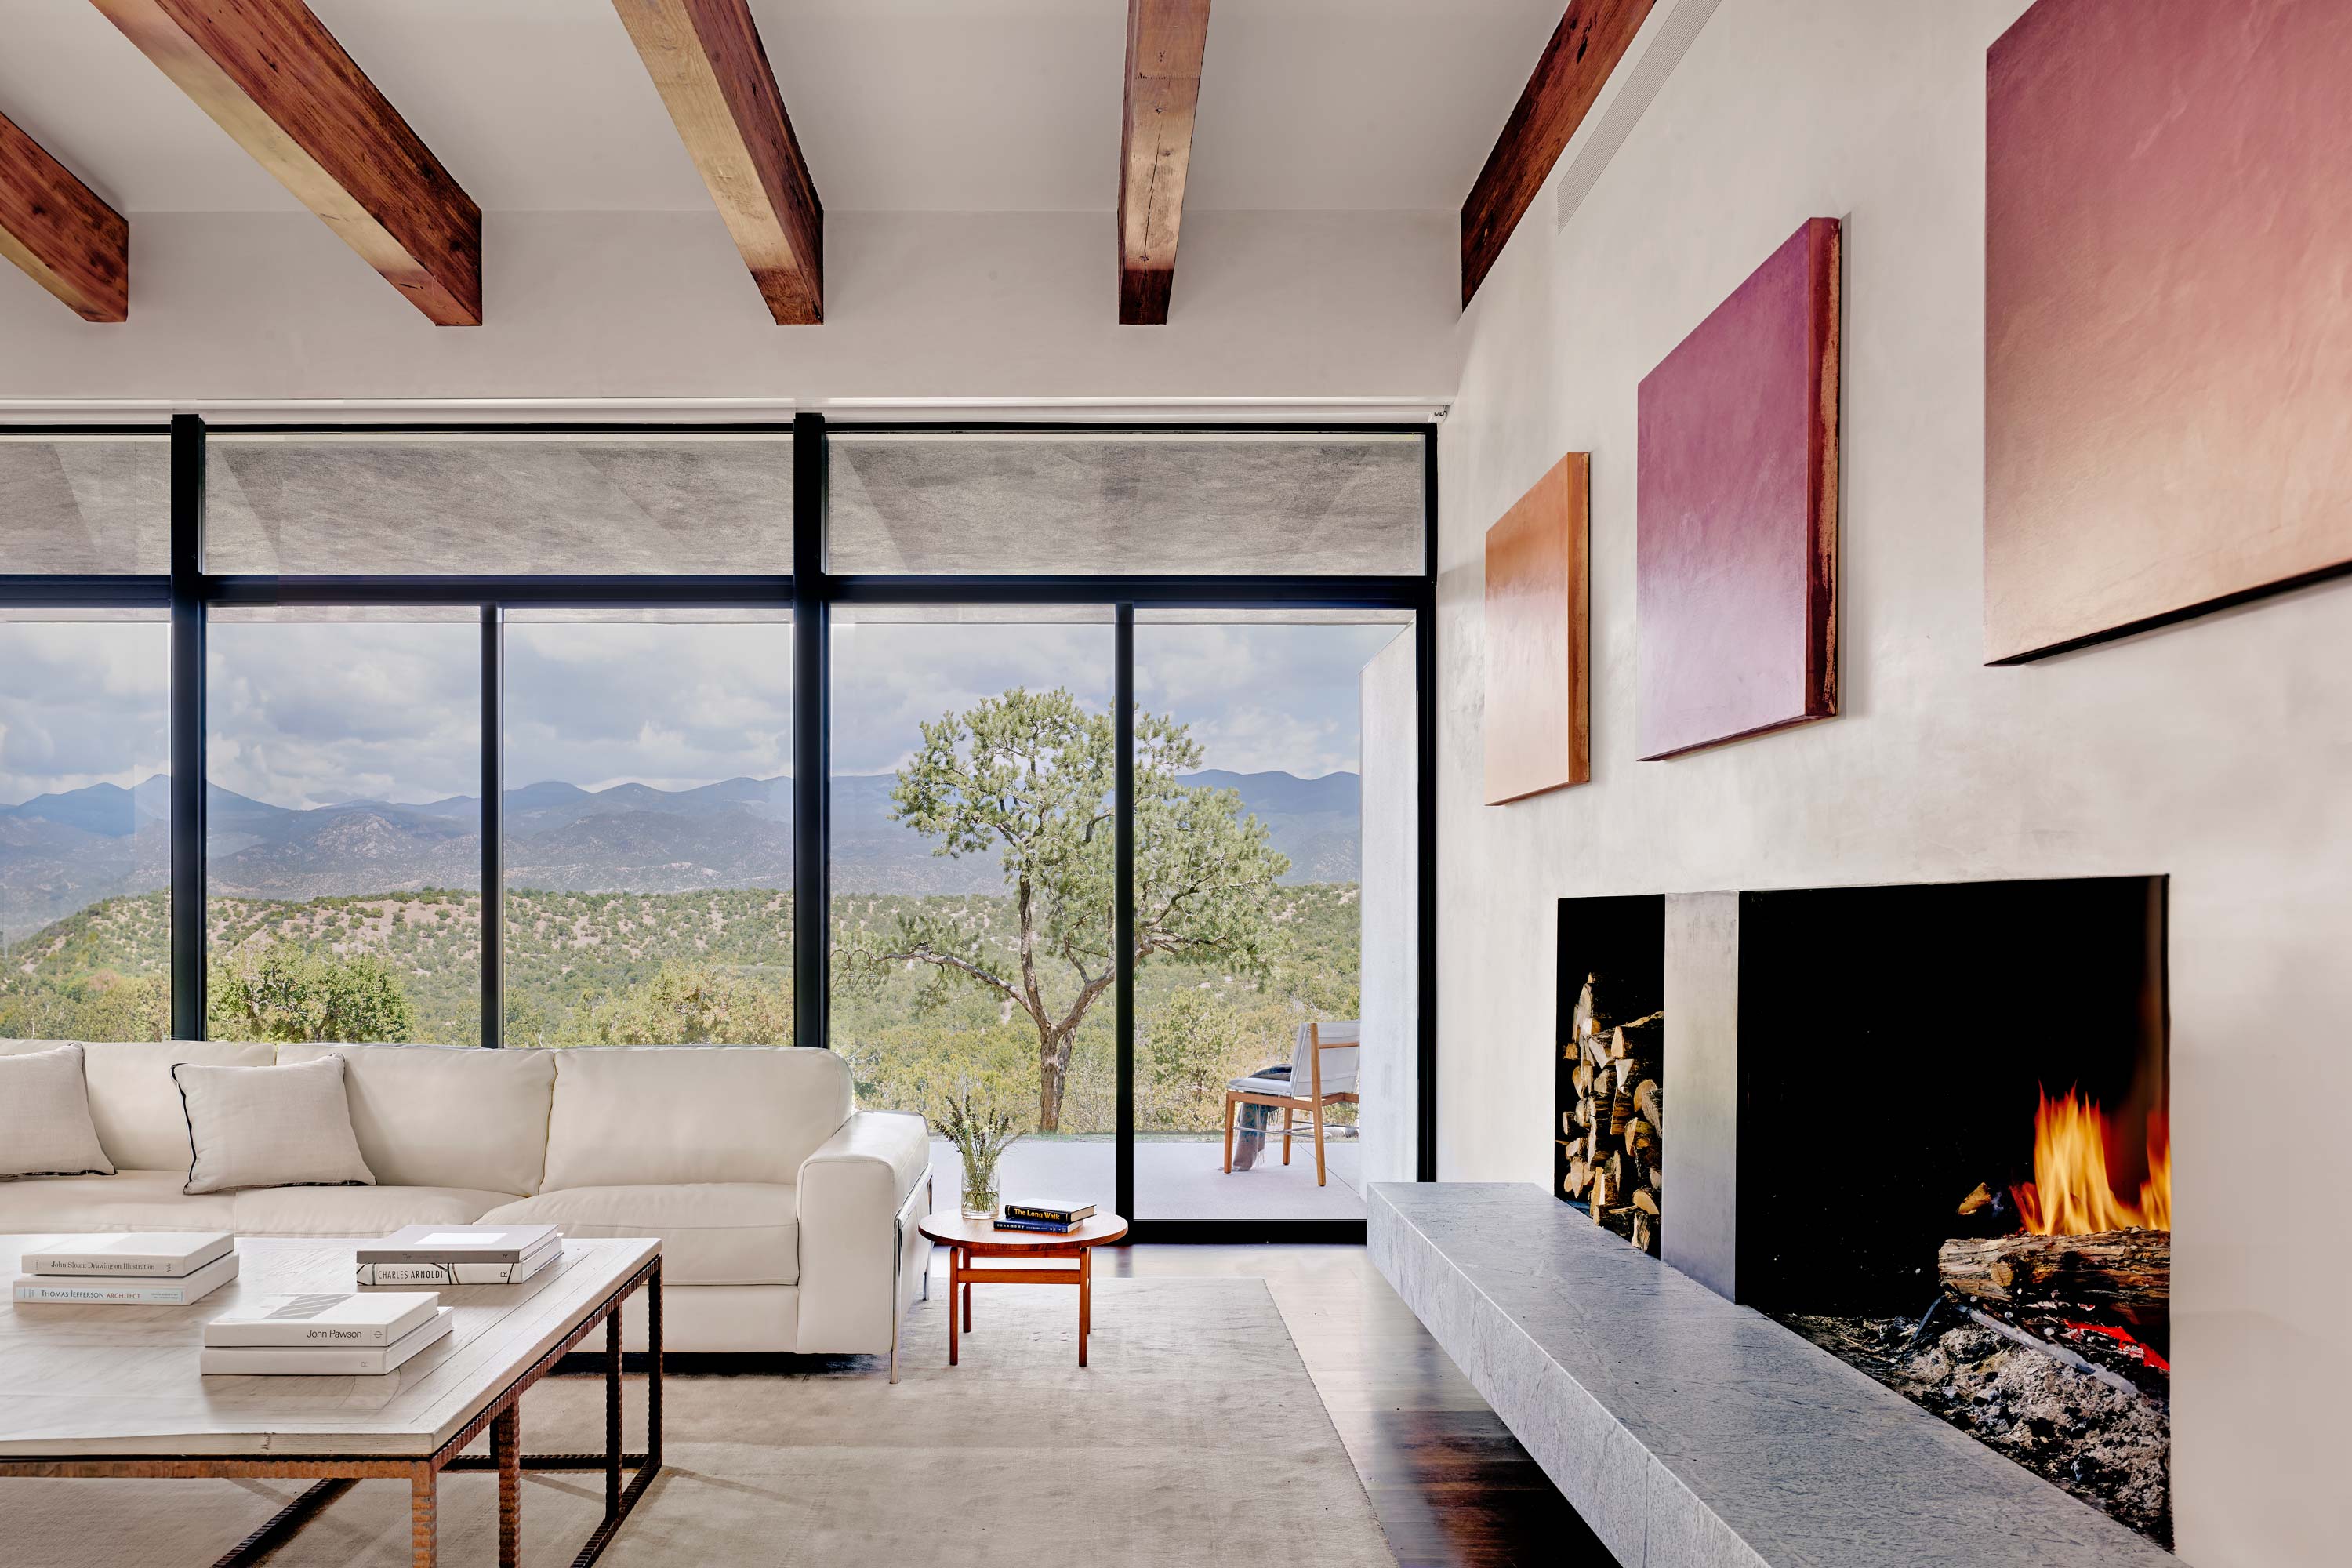 Interior photo of the Sangre de Cristo House by Specht Novak Architects. Shot by Casey Dunn, featuring a bright living area with beamed ceilings, Fireplace, and glass wall with views of mountains in the background.